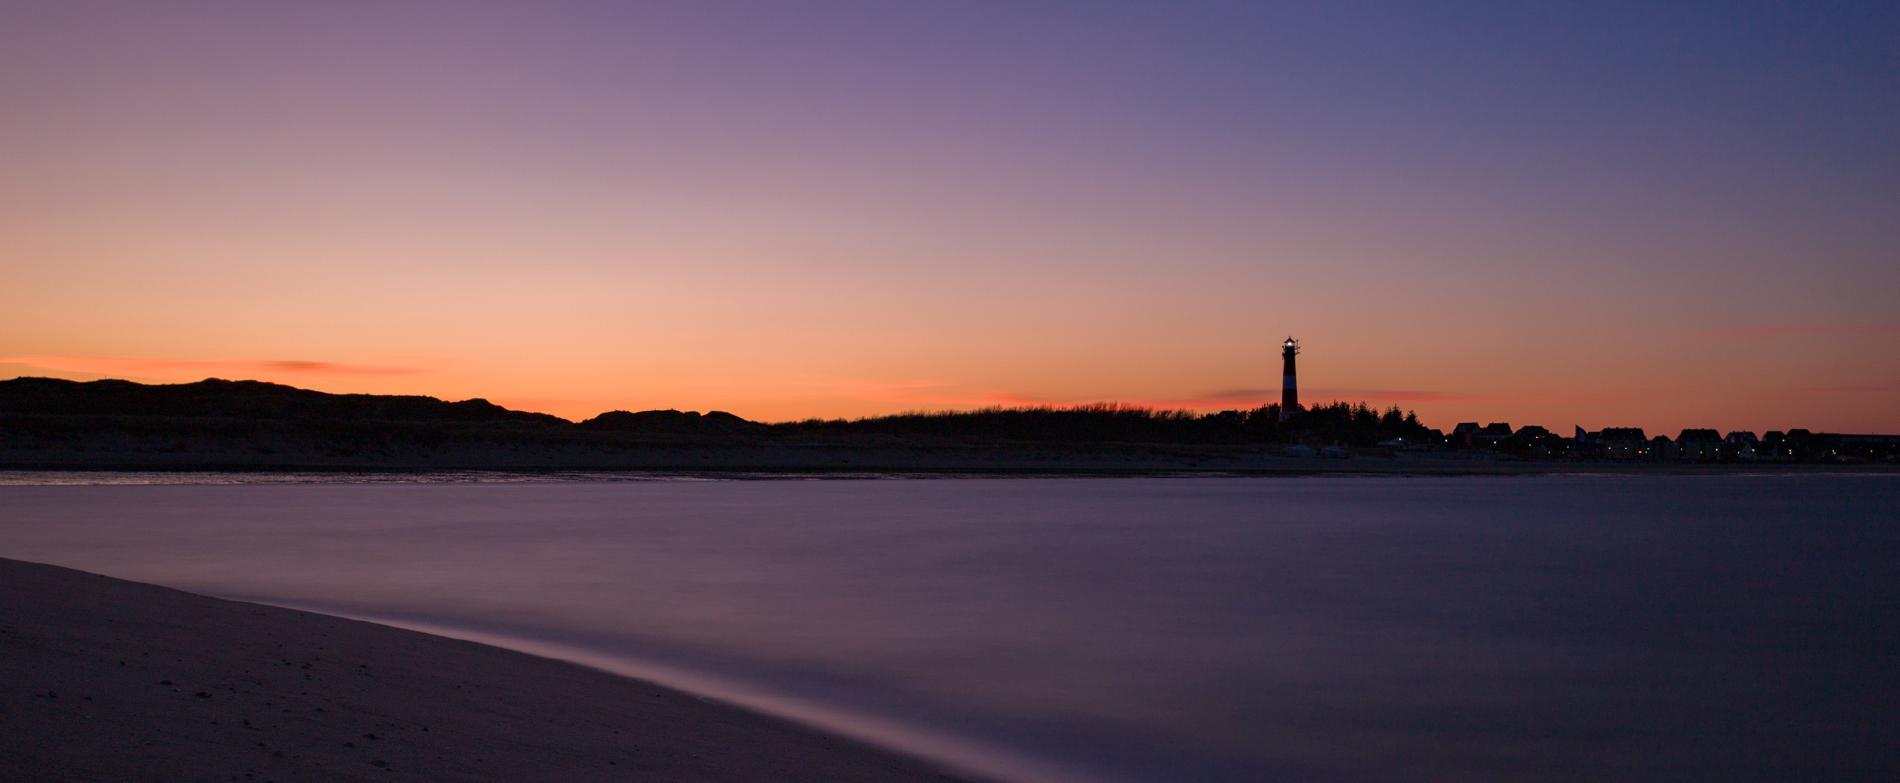 The Hörnum lighthouse at sunset with purple and orange colors